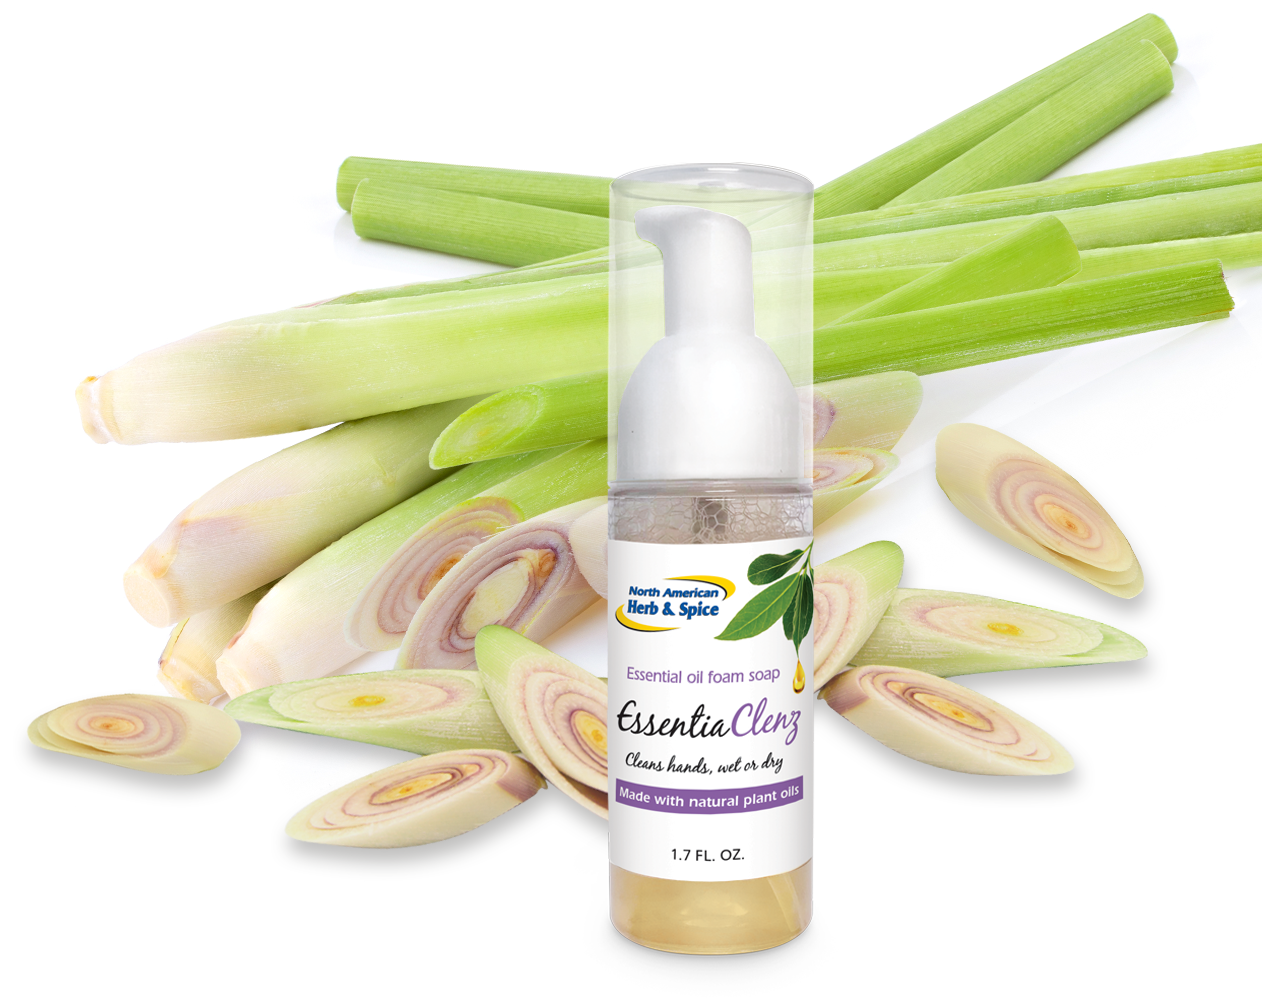 Raw lemongrass with EssentiaClenz product